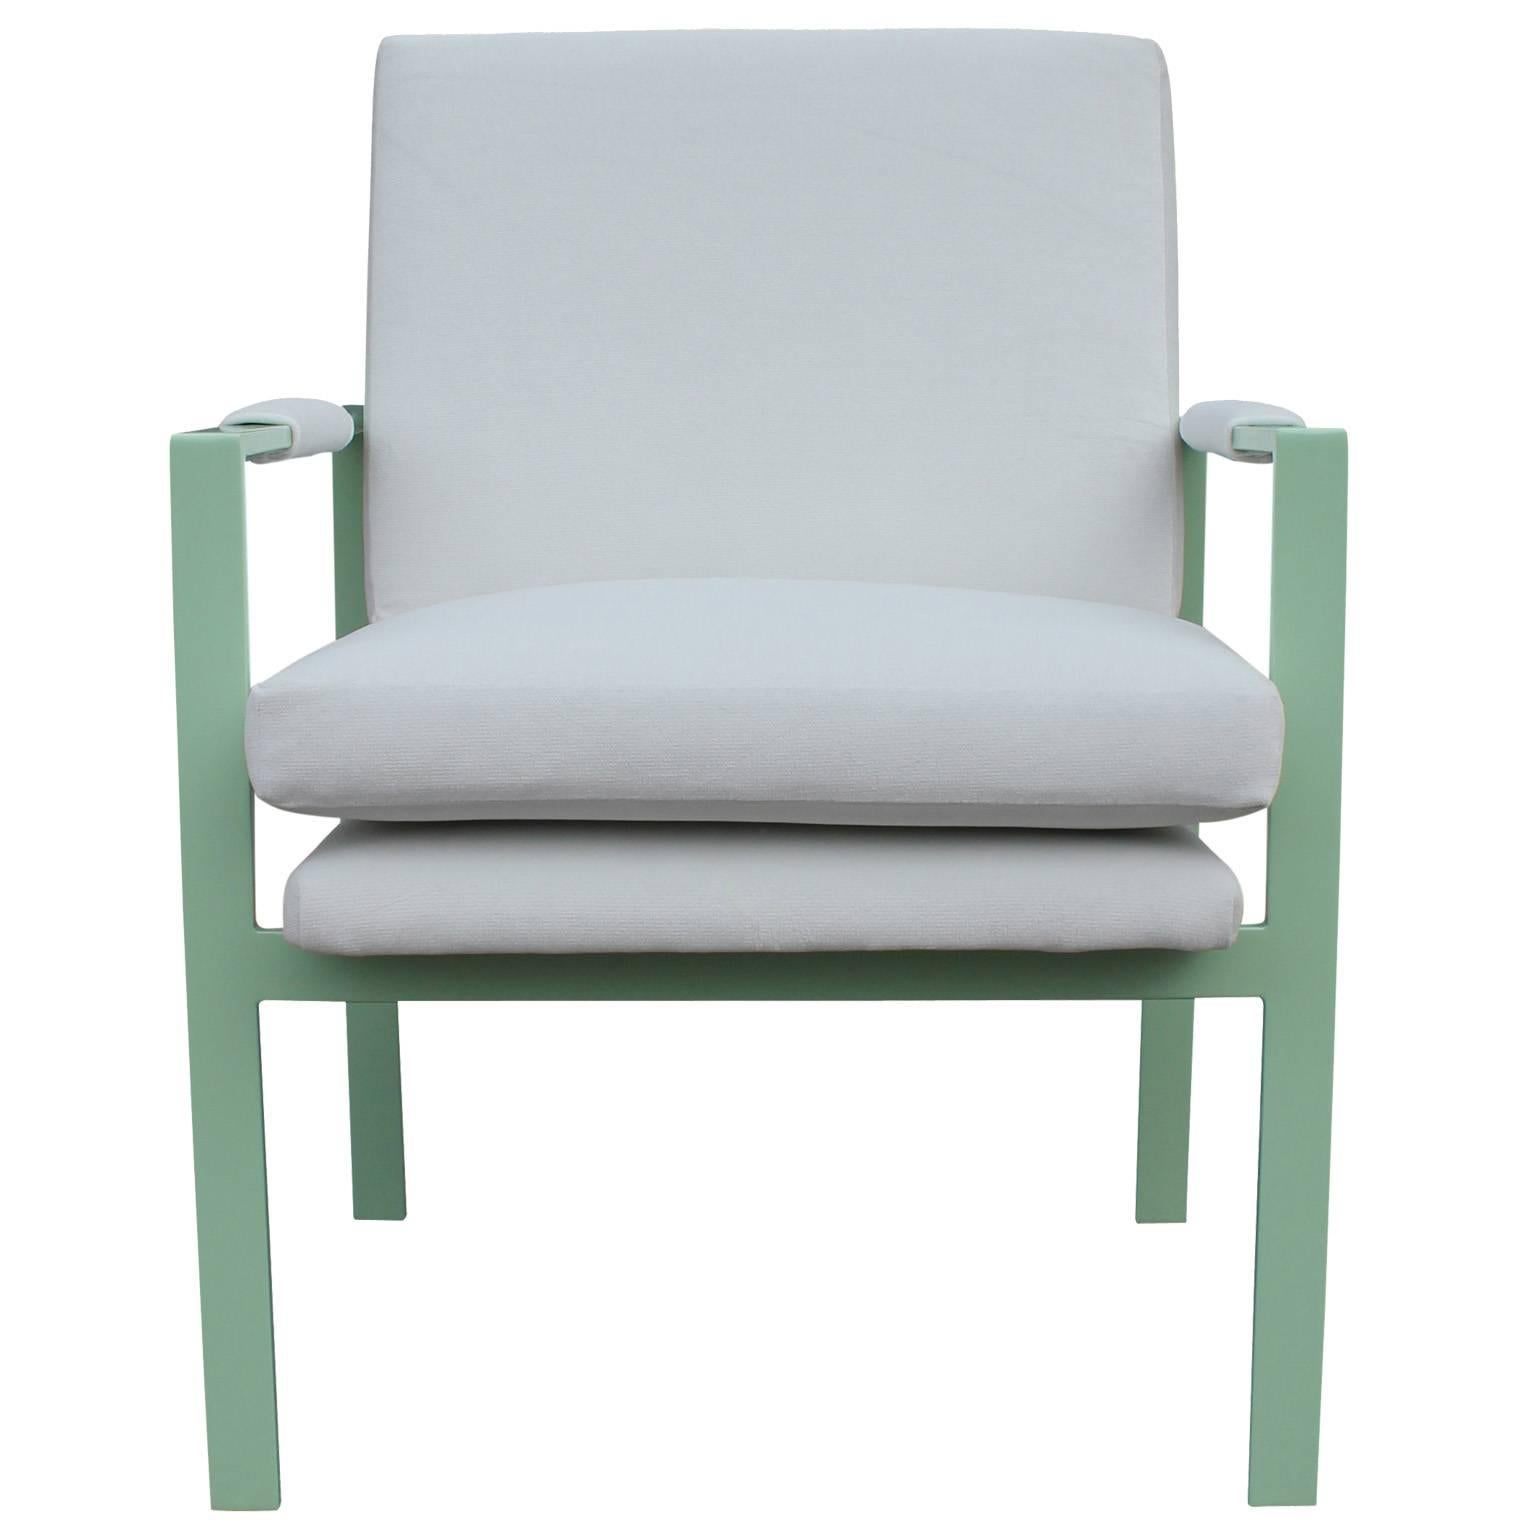 Stunning pair of lounge chairs. Clean lined, steel flat bar frame is finished in a mint green powder coat. Chairs are freshly upholstered in a marshmallow white velvet. Chairs have wonderful negative space and look incredible from every angle. 